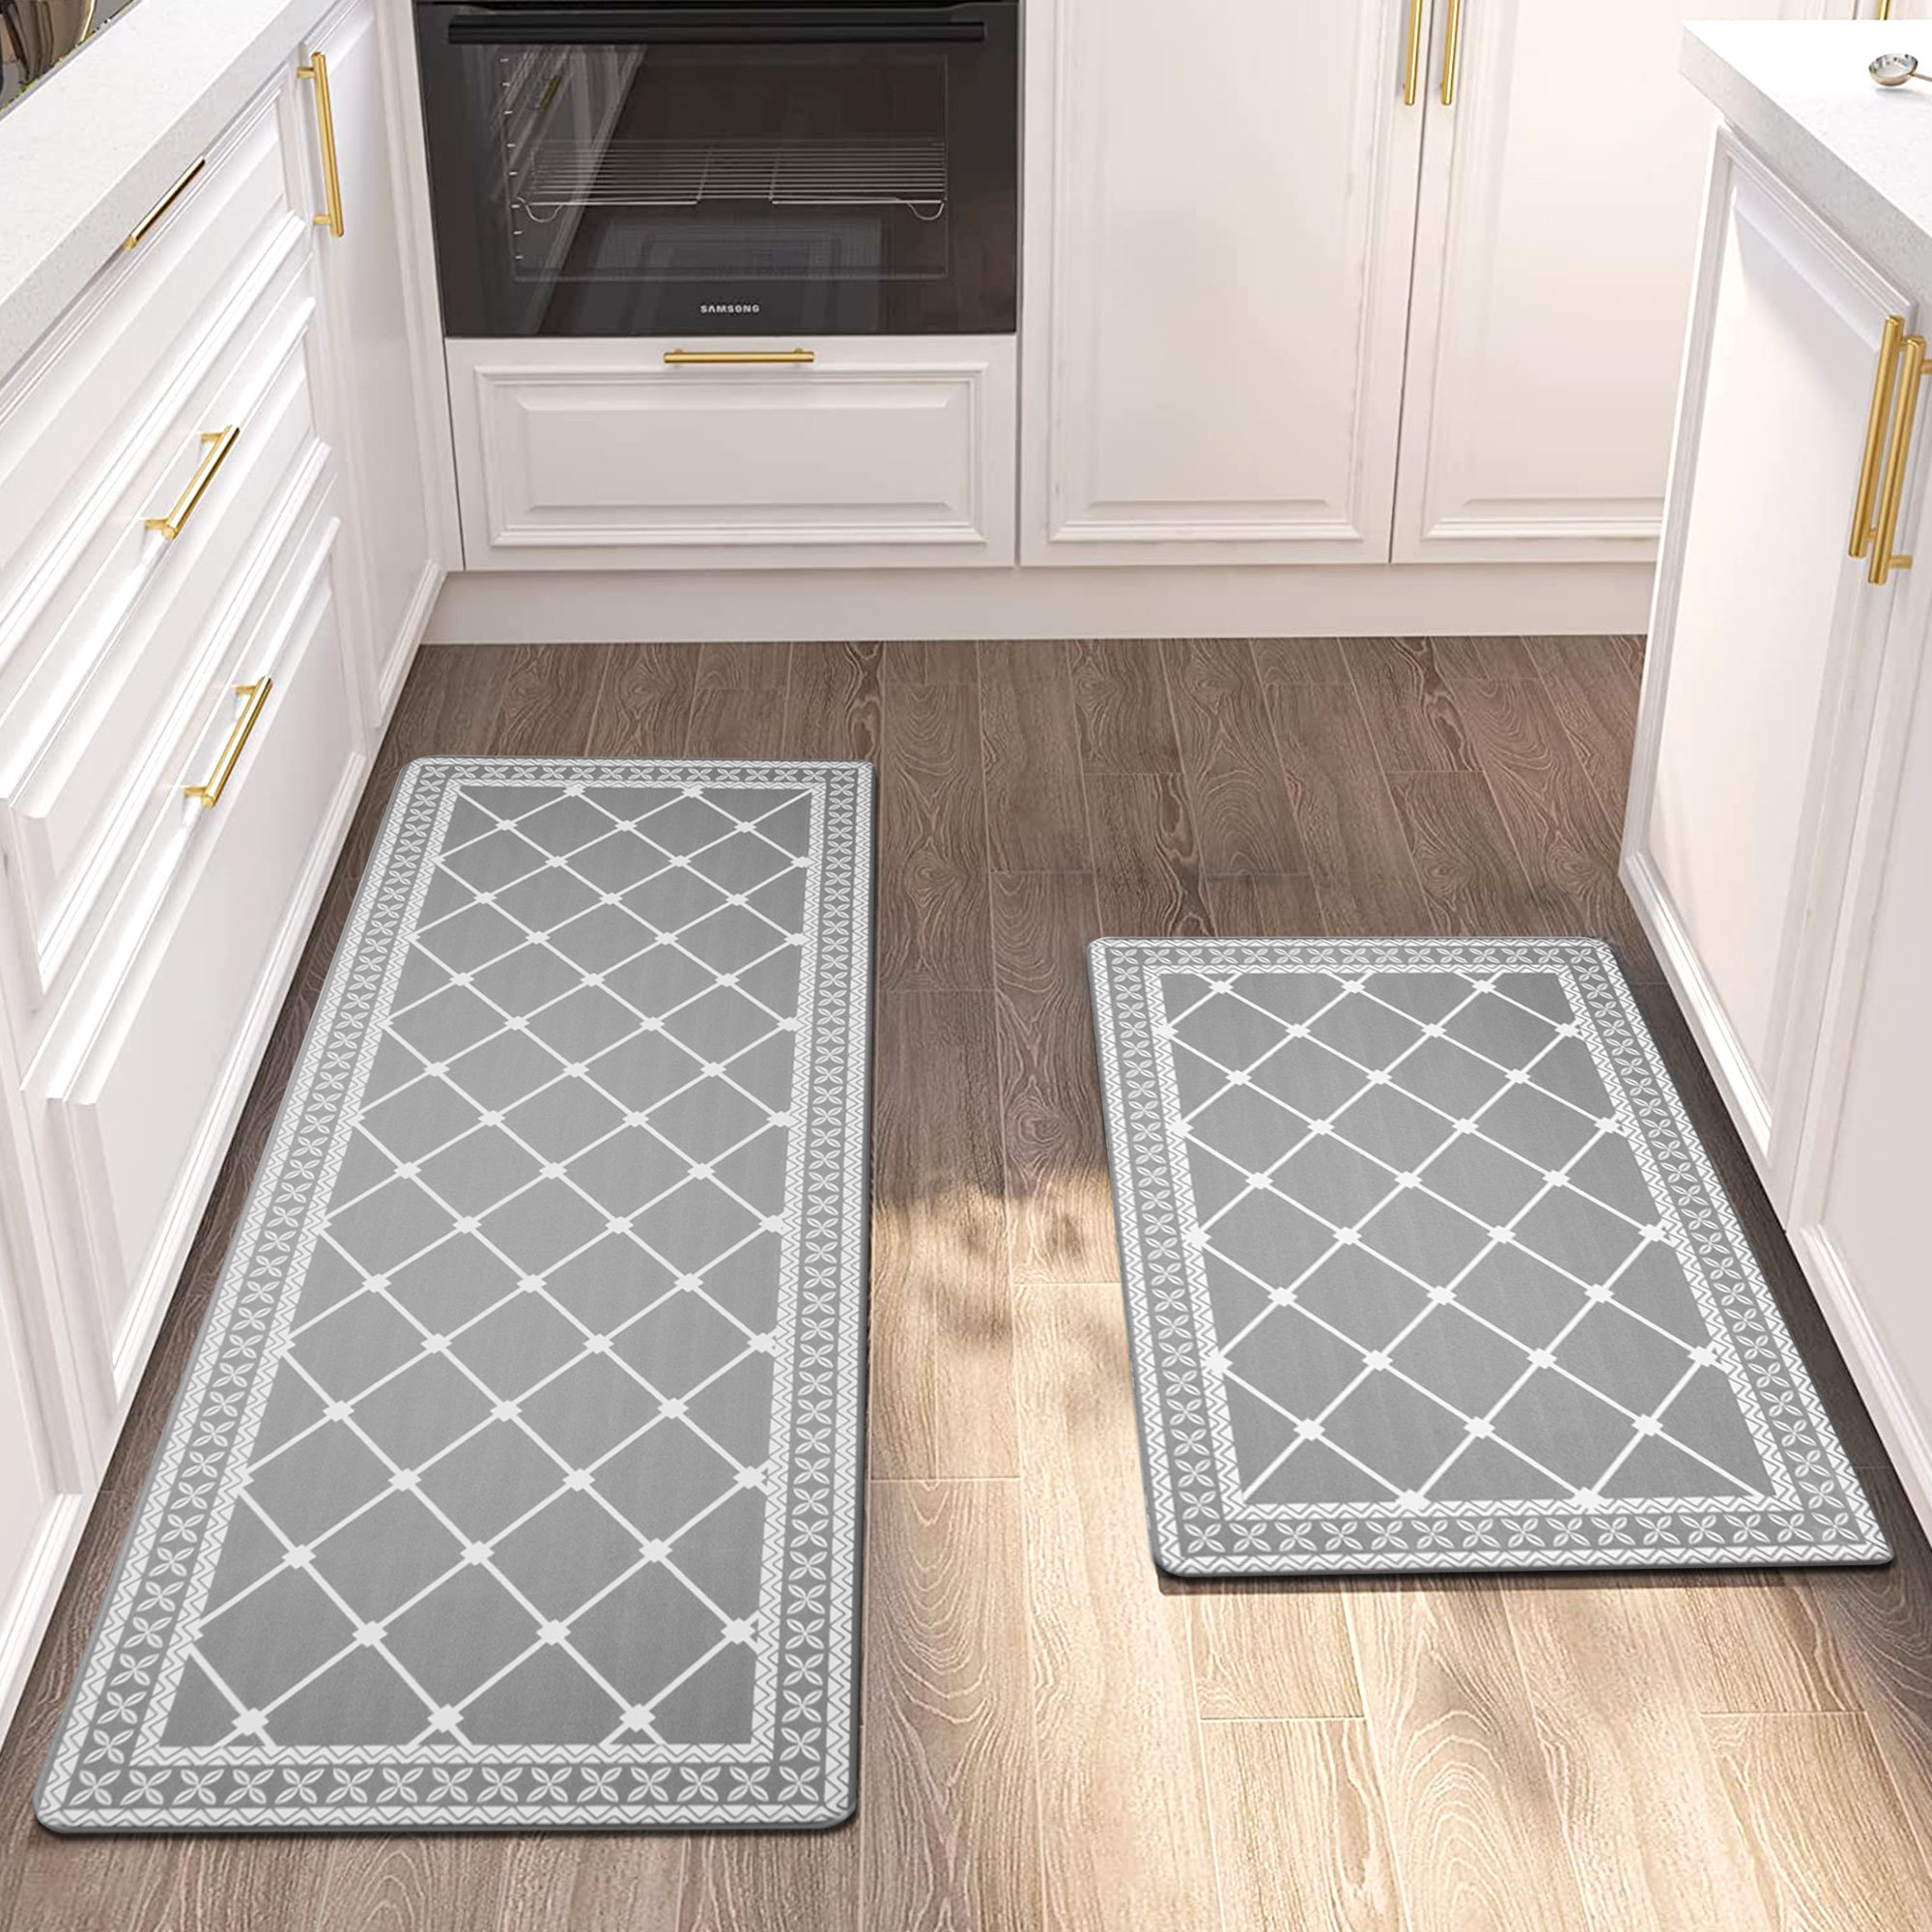 Comfort Mat Kitchen Rug Anti Fatigue for Counter Floor, Large Thick  Waterproof Washable Non Slip Rubber Padded Kitchen Sink Mats,Set of 2,Gray